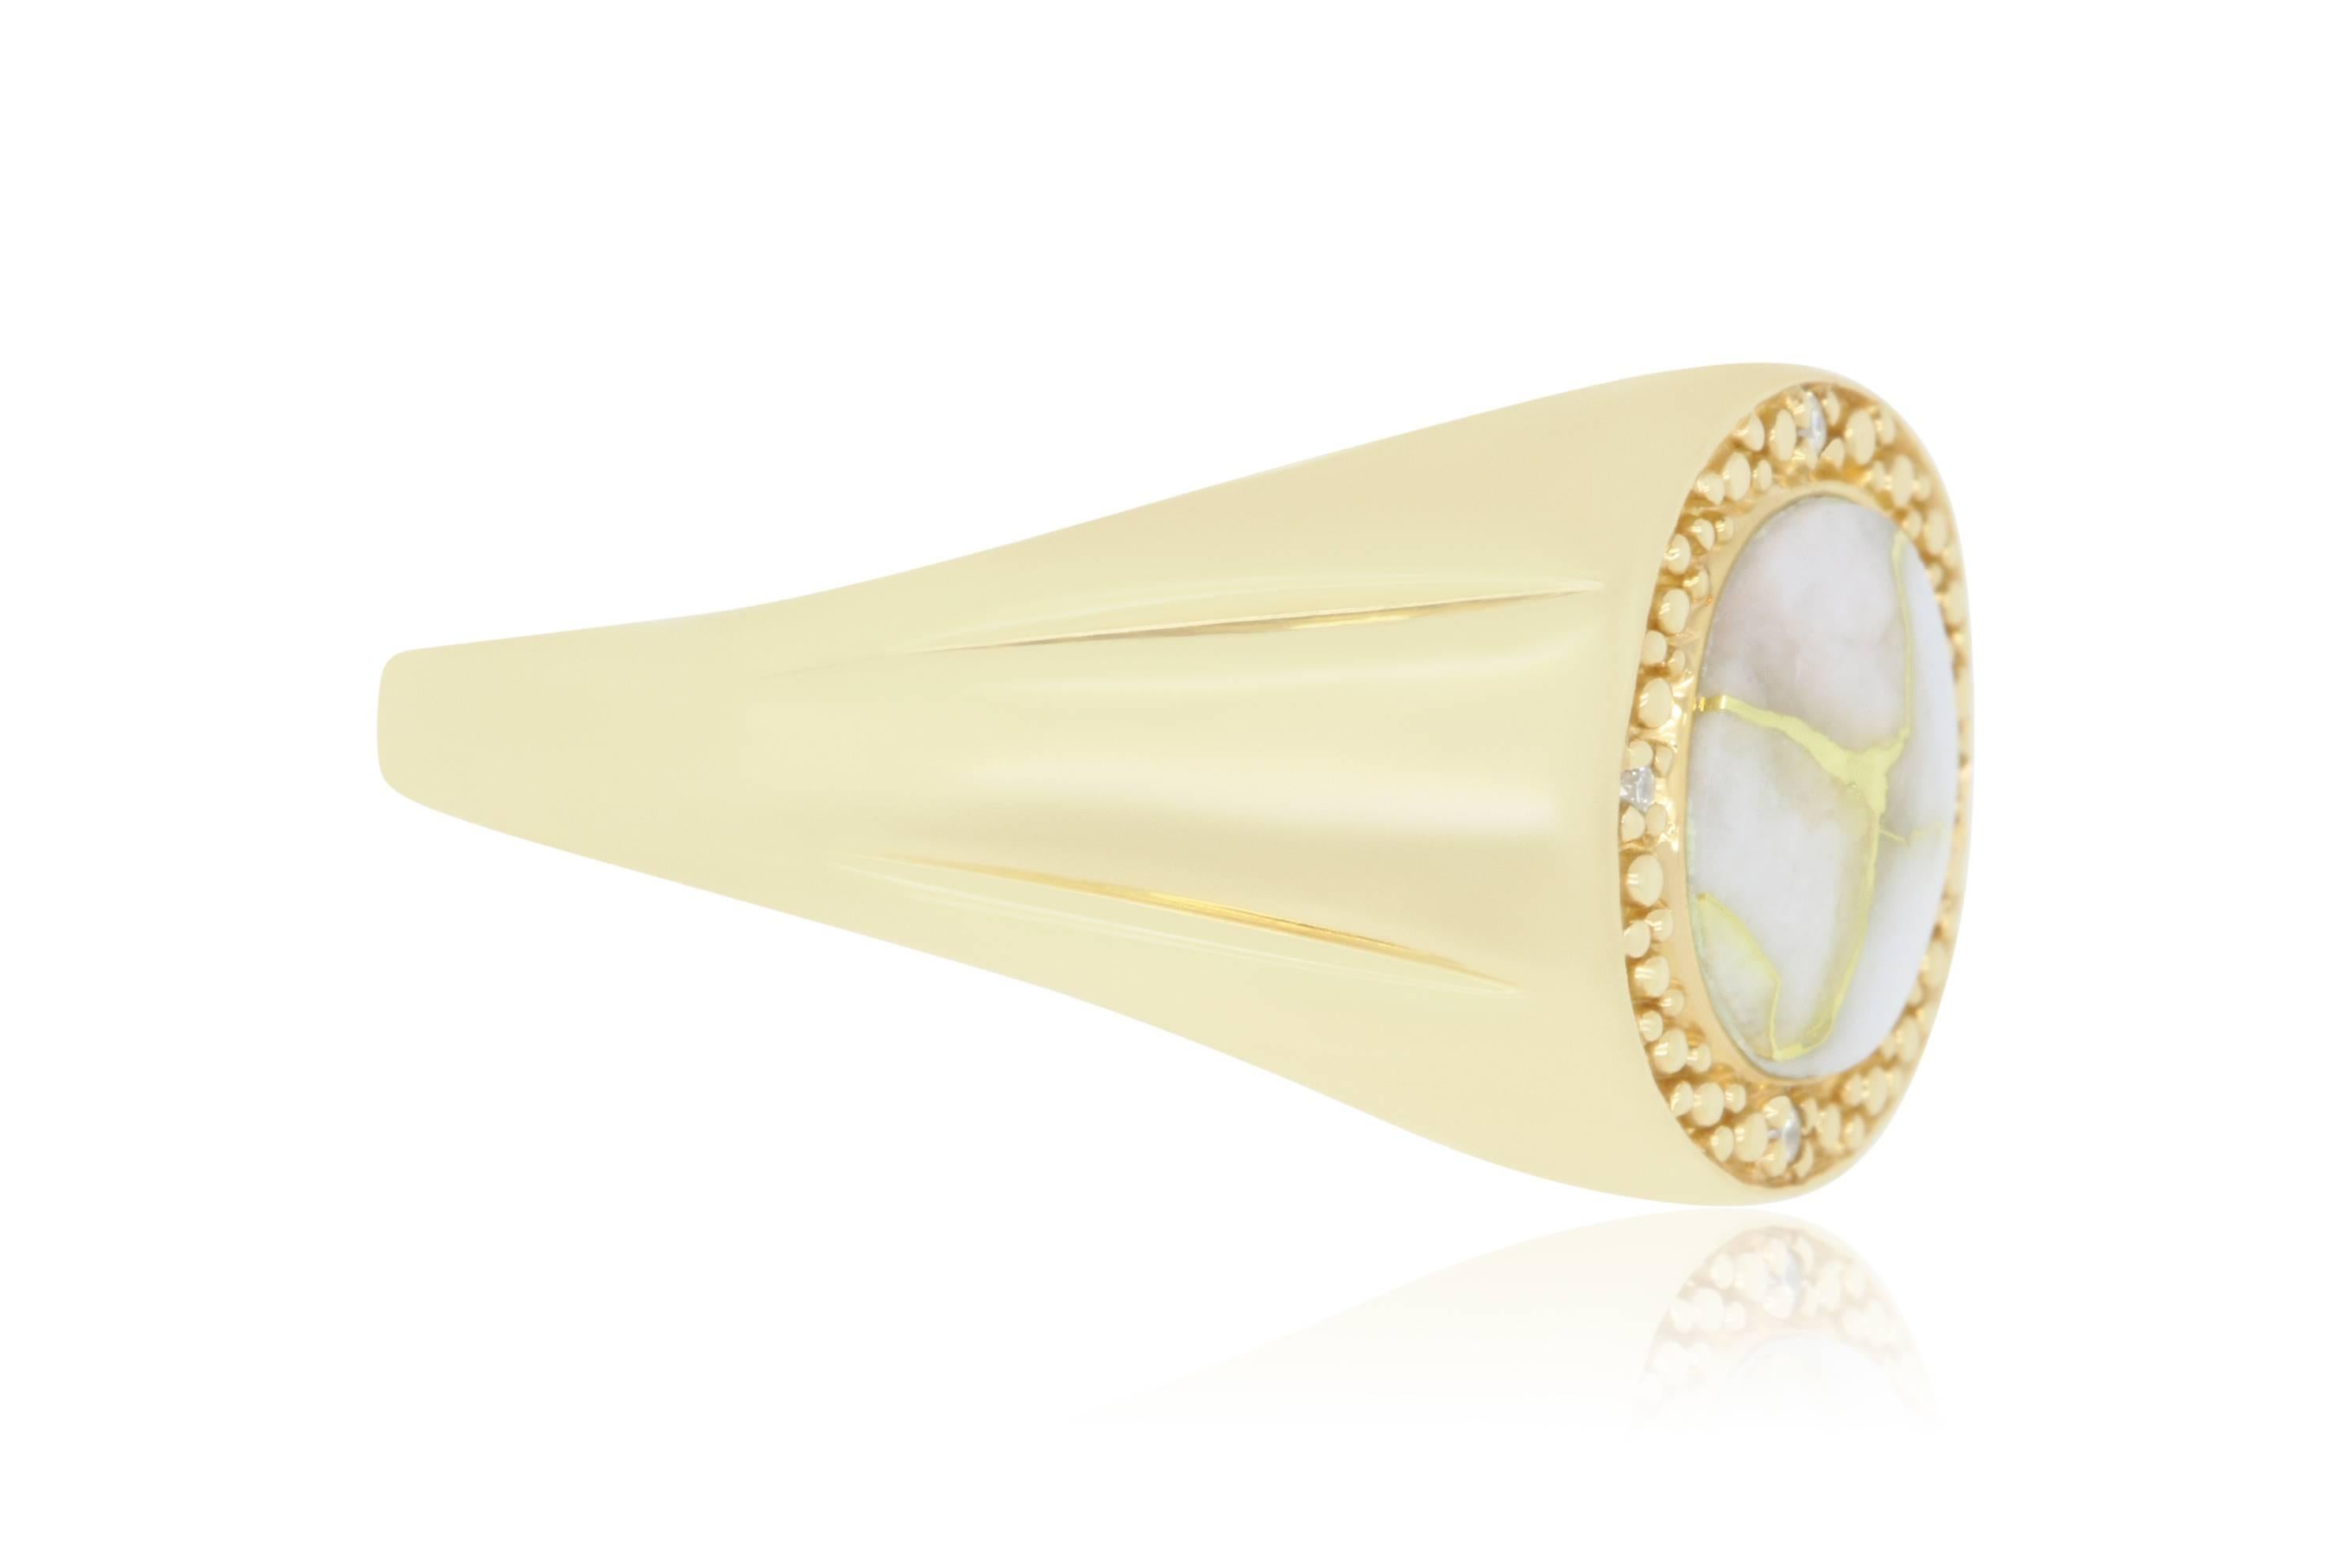 This unique Gold in Quartz stone weighs in at 3.55 carats. Set in a 14k Yellow Gold with 4 white diamonds, it is a guaranteed show stopper!

Material: 14k Yellow Gold
Gemstones: 1 Oval Gold in Quartz at 3.55 Carats.
Diamonds: 4 Brilliant Round White